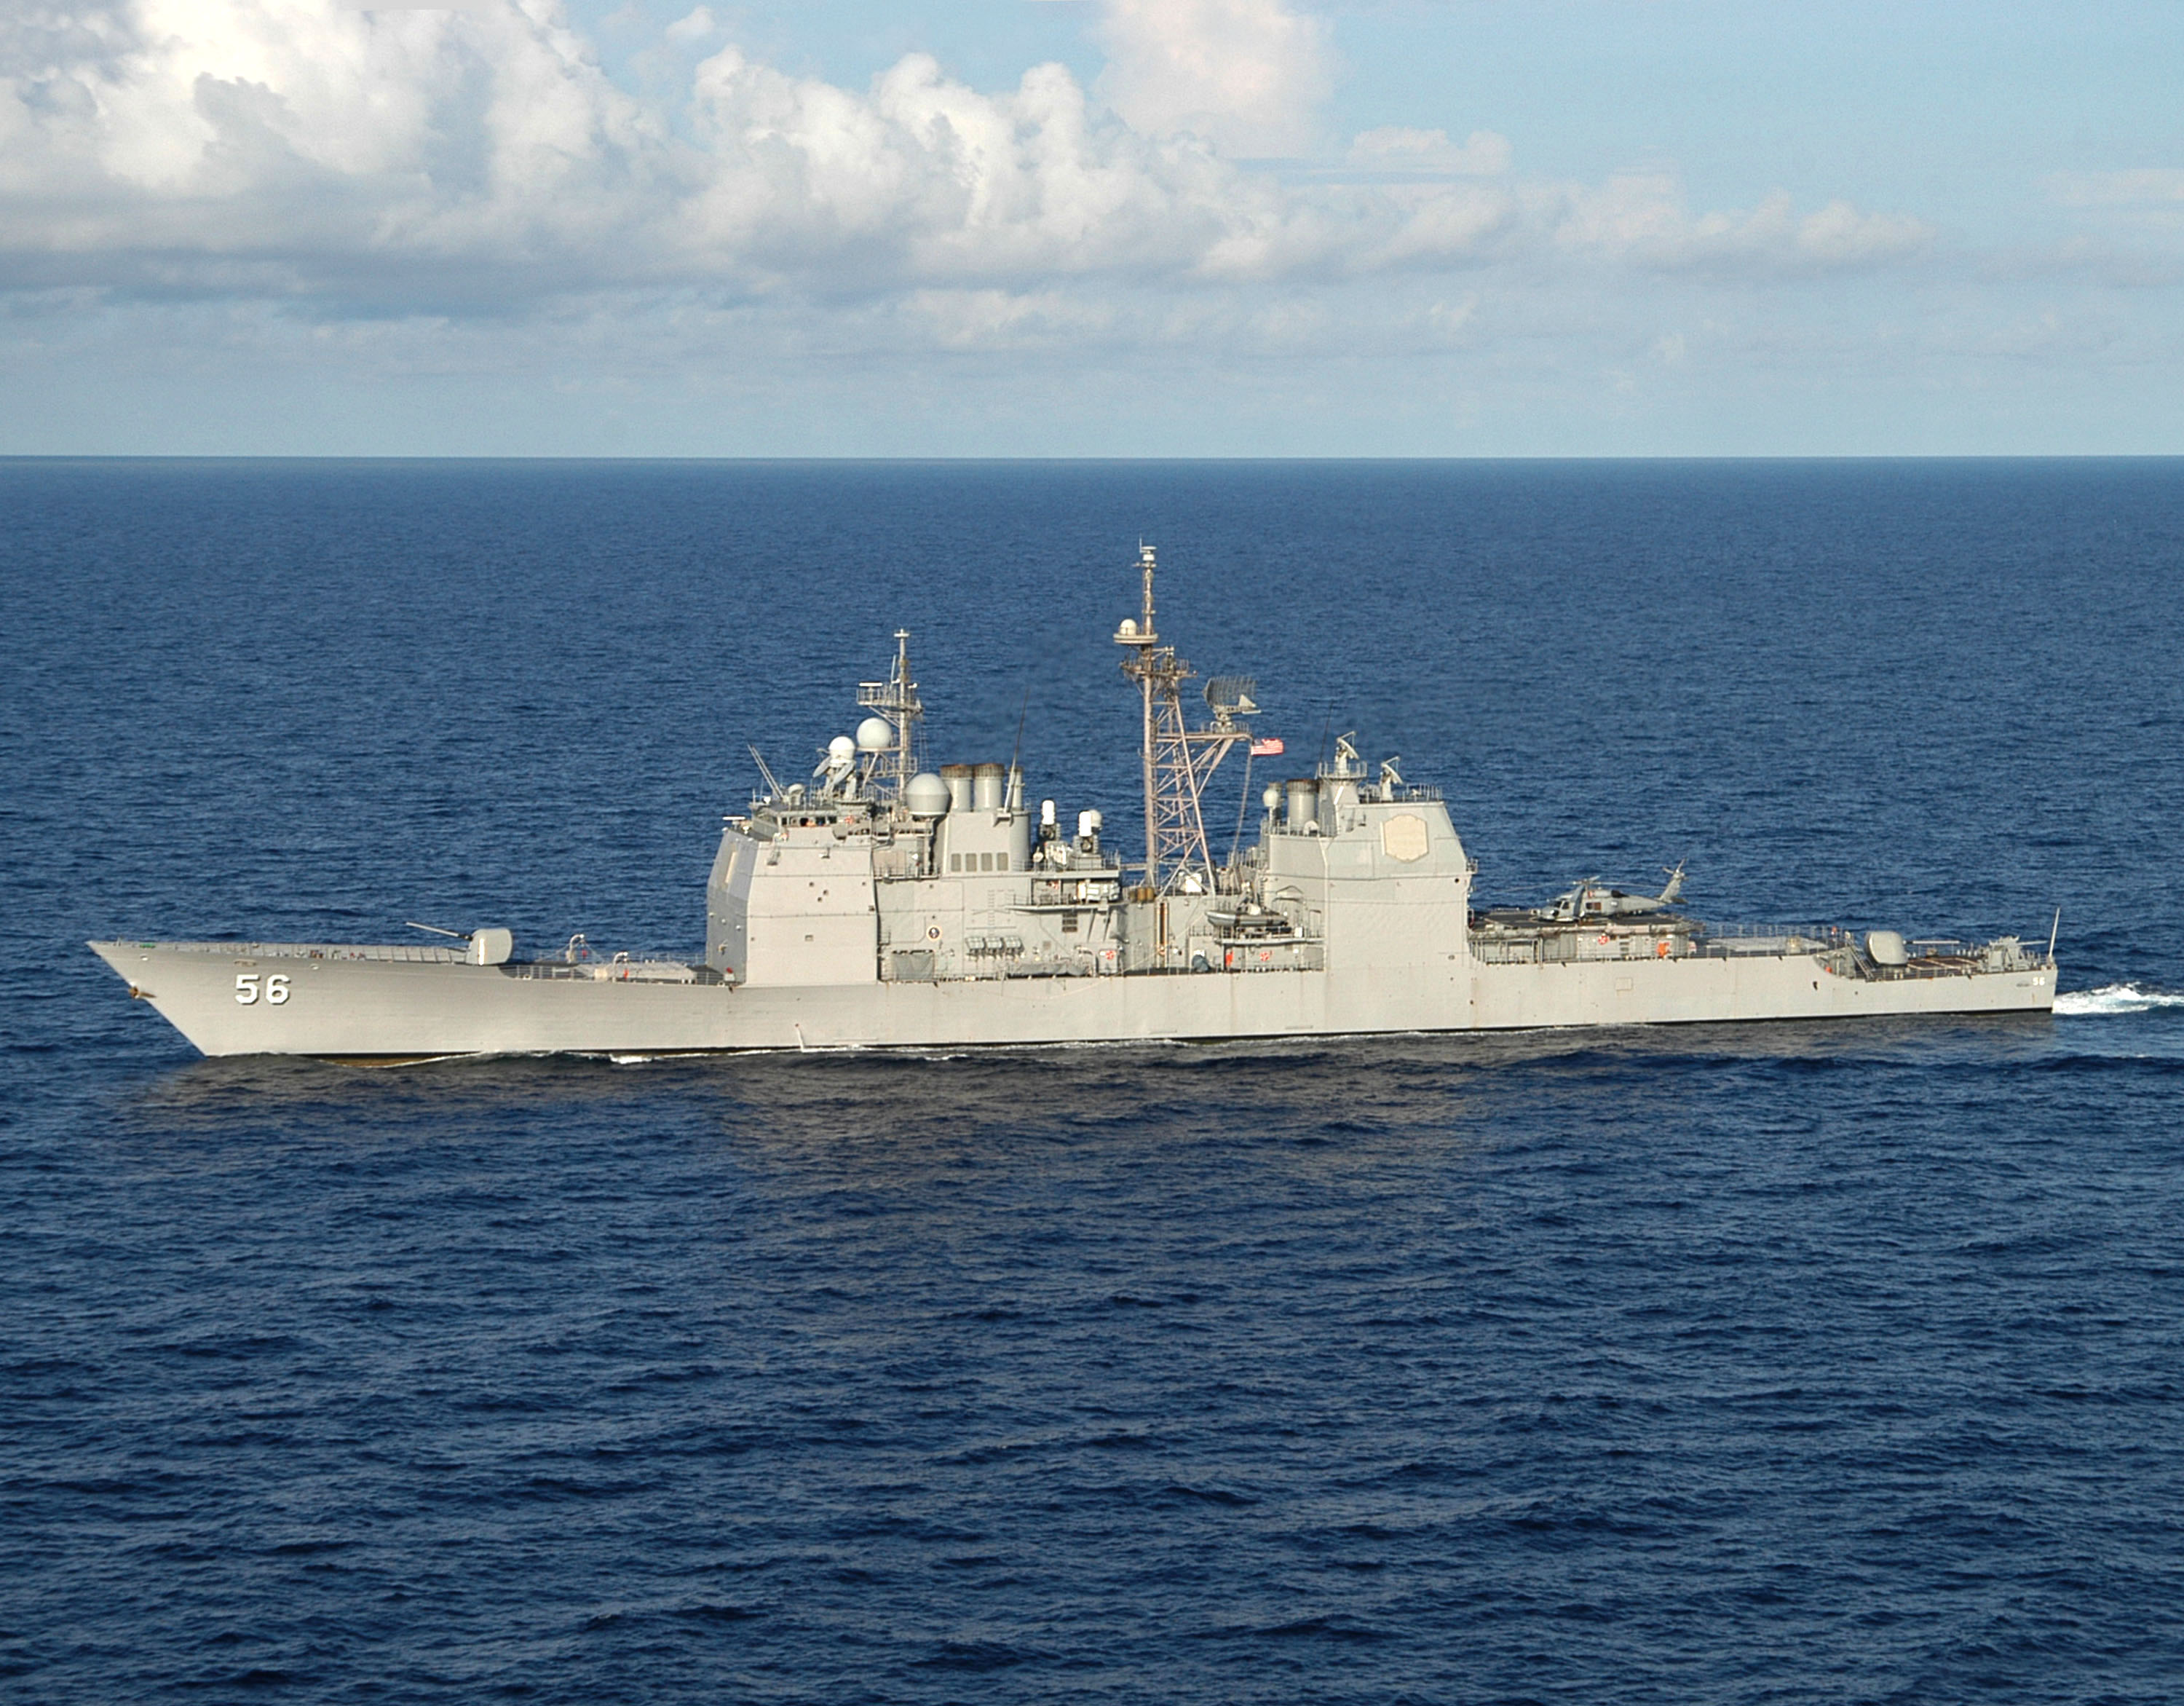 US Navy 050715-N-8163B-002 The guided missile cruiser USS San Jacinto (CG 56) conducts a close quarters exercise while underway in the Atlantic Ocean